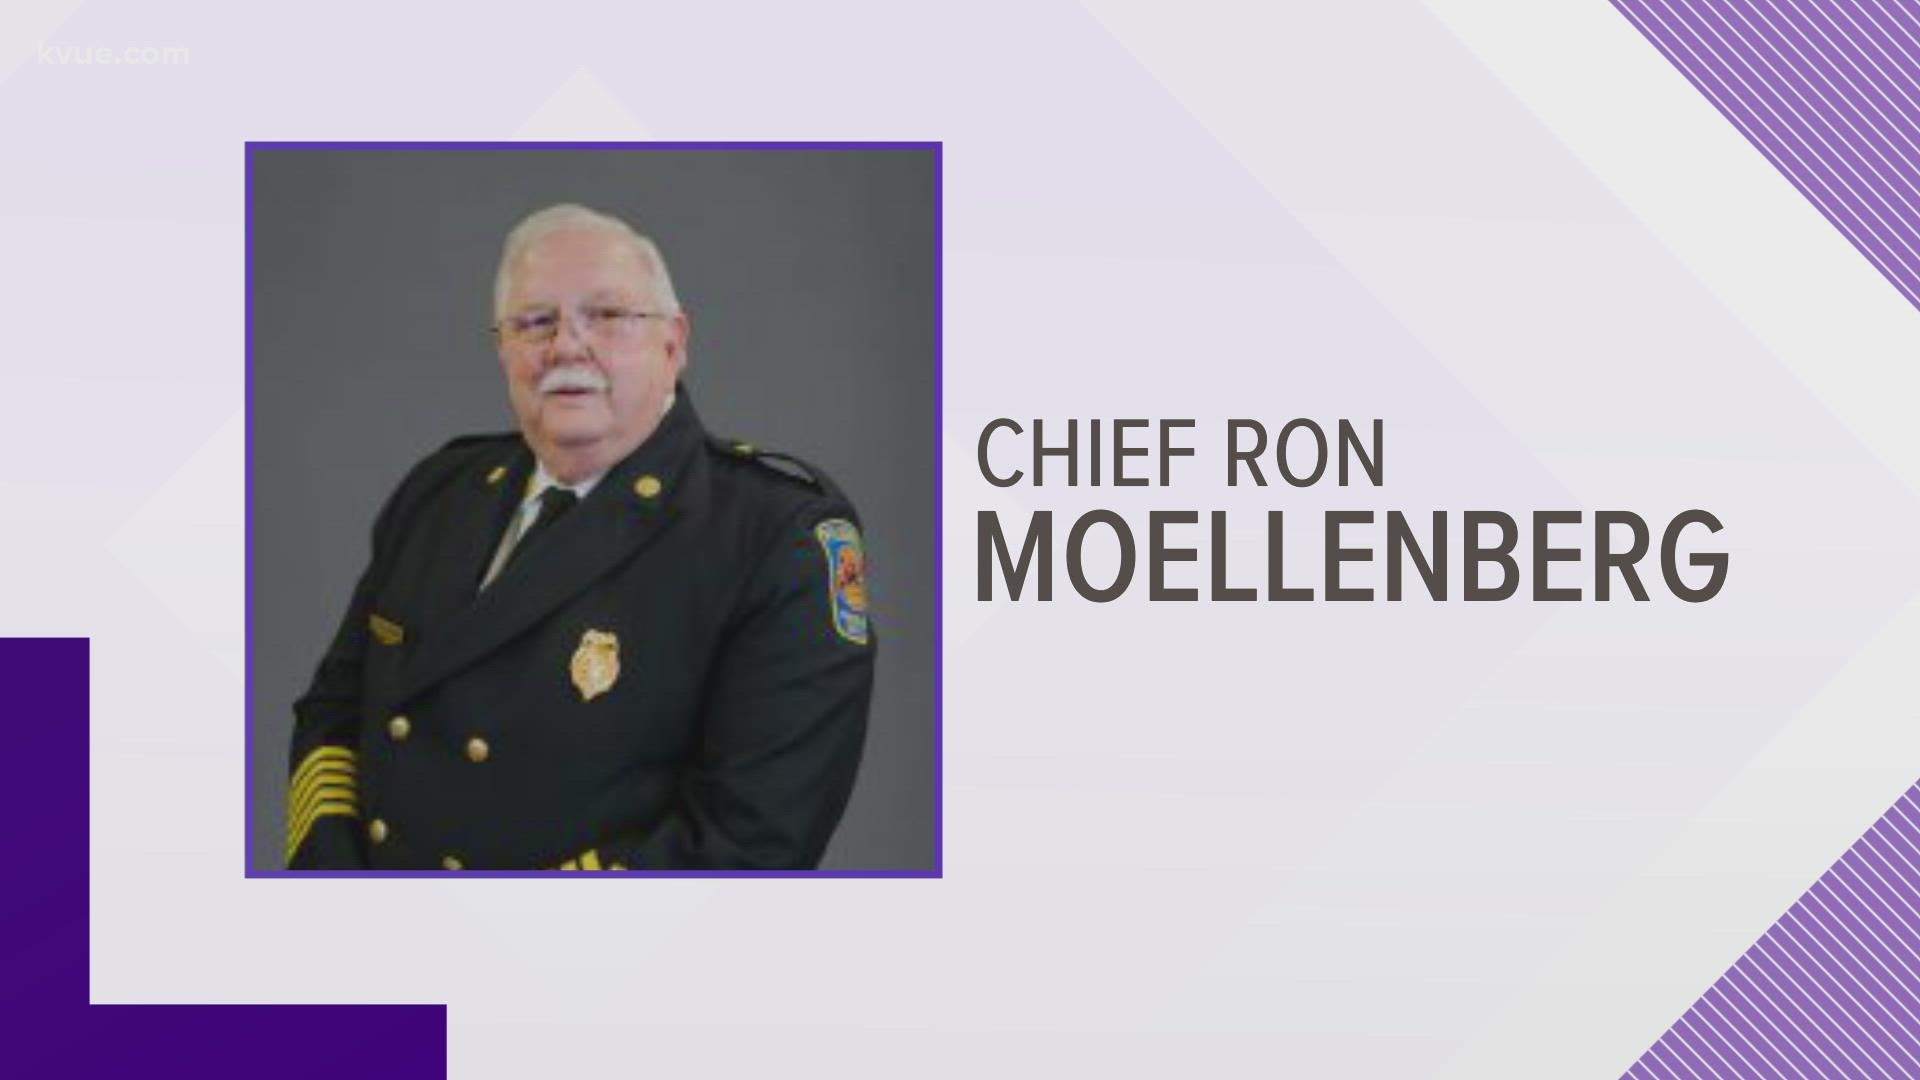 The Pflugerville fire chief announced his retirement on Friday.